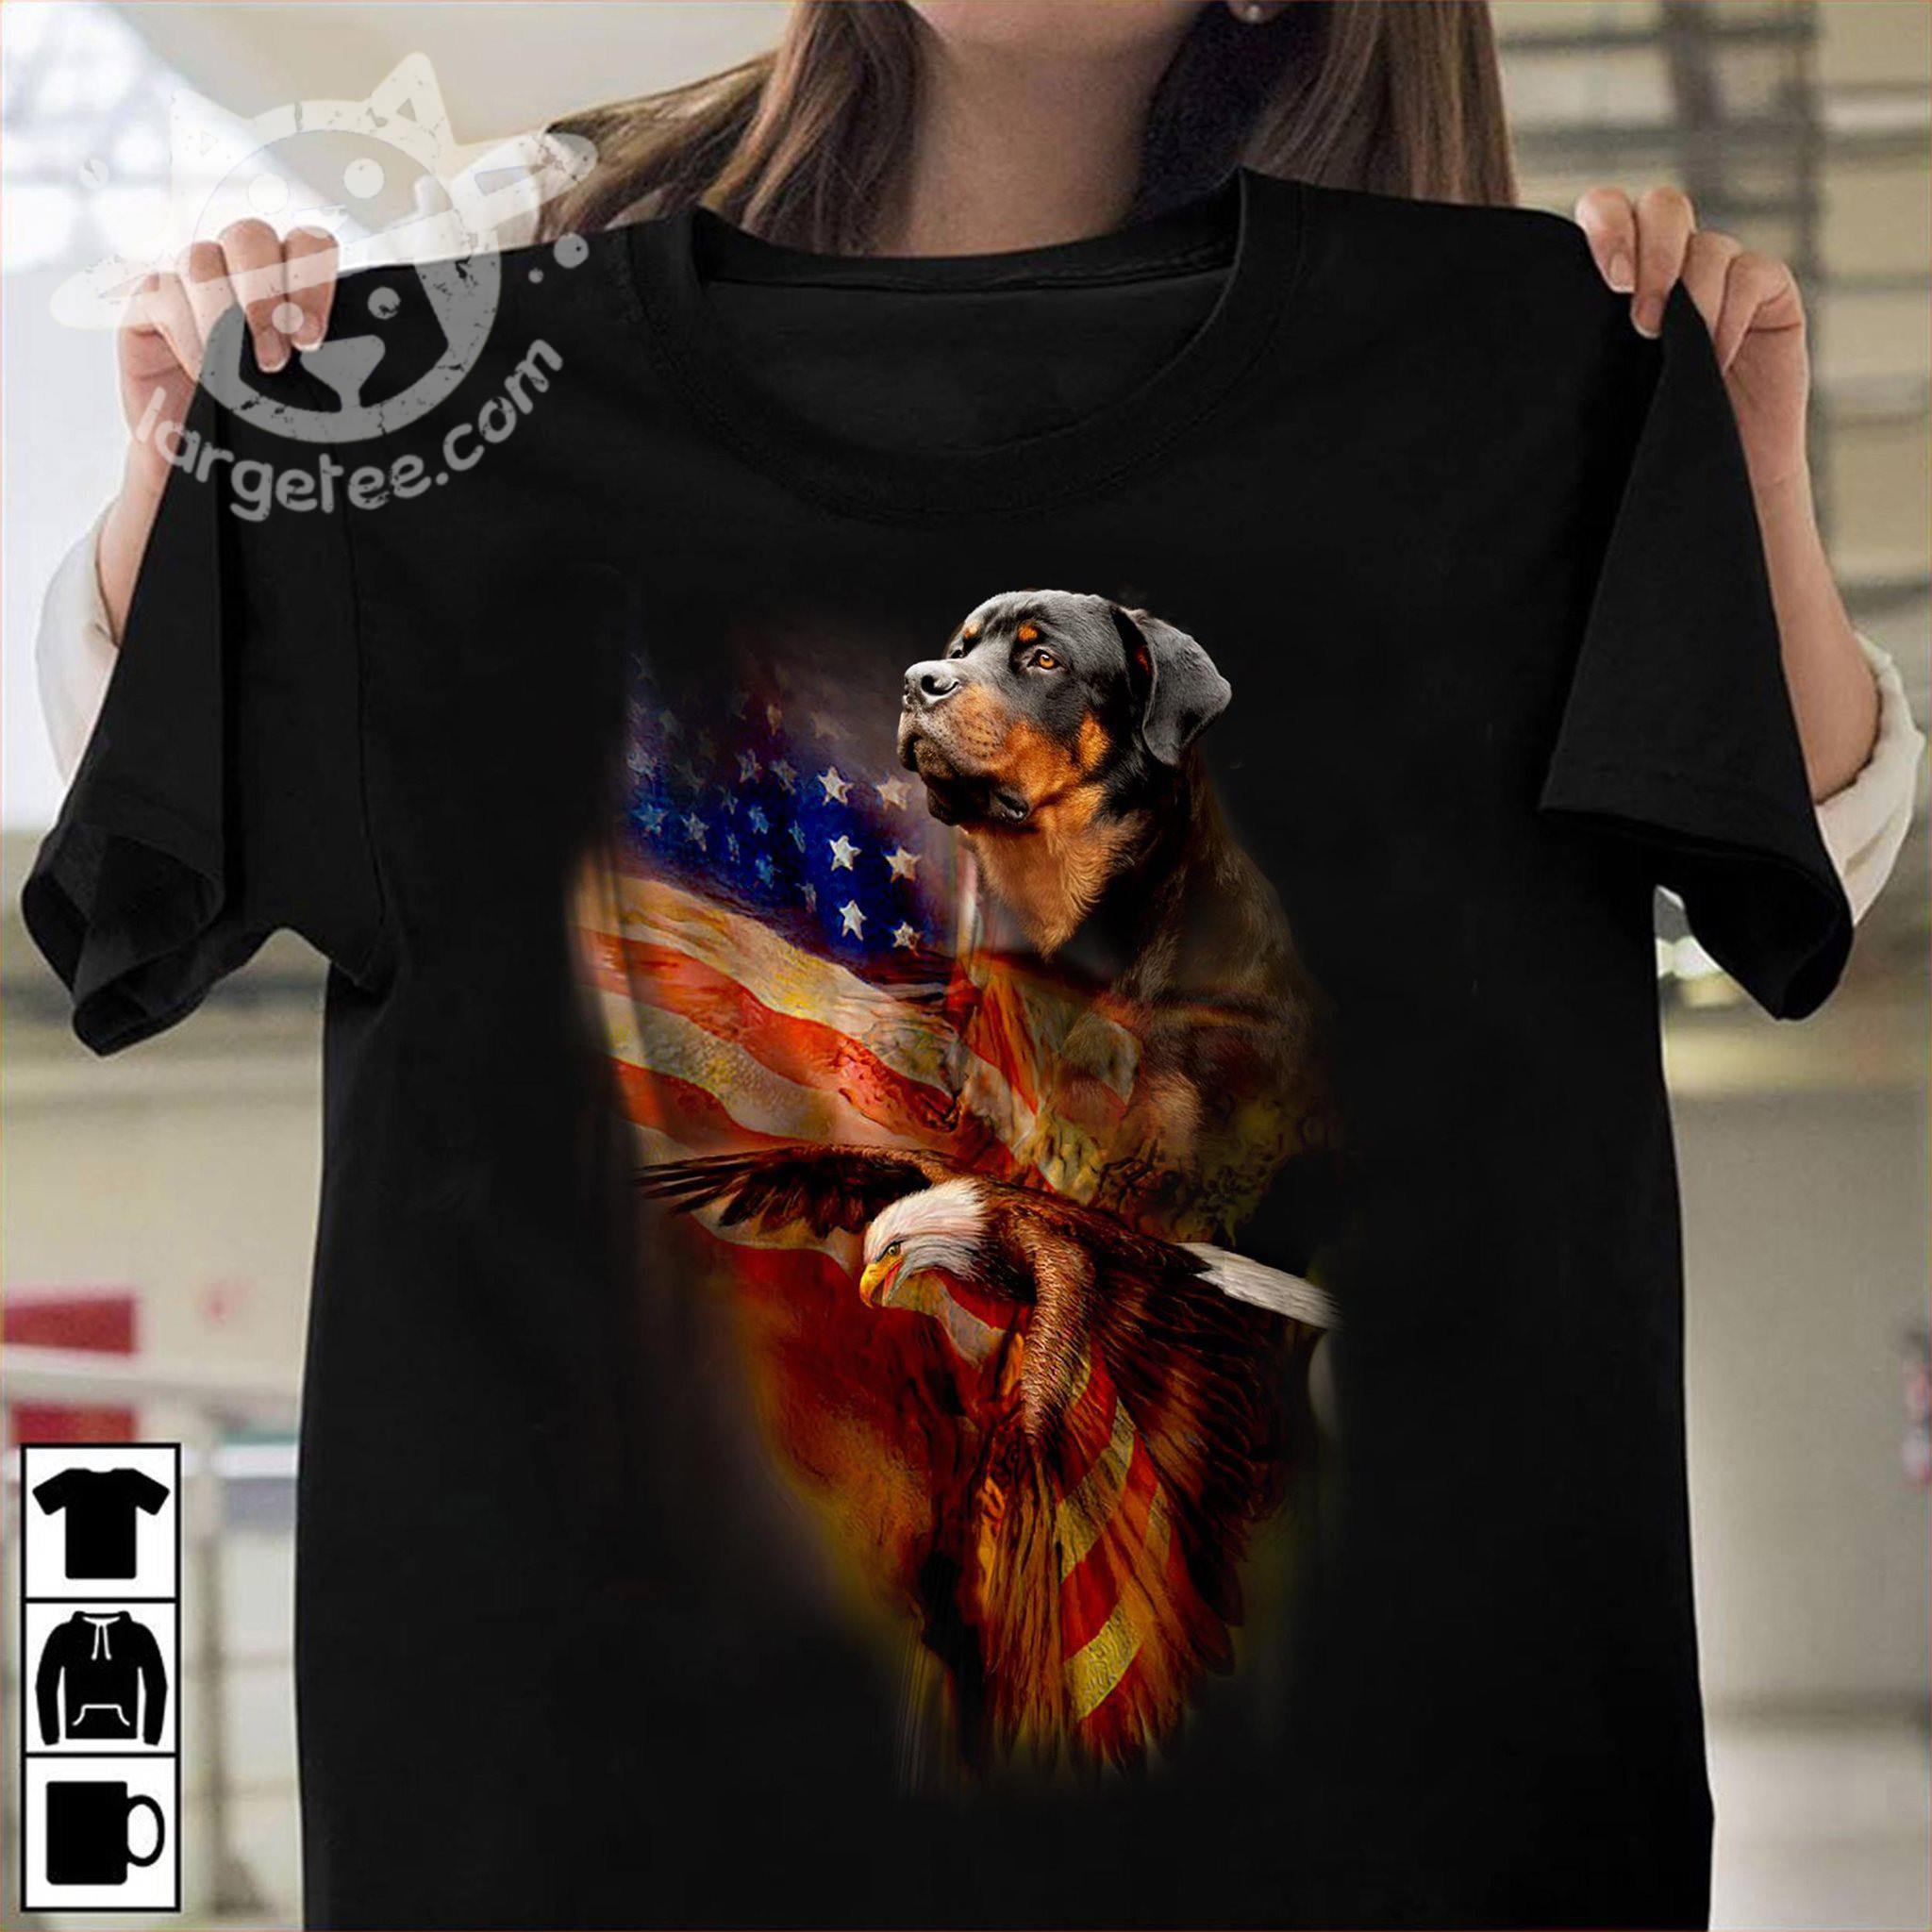 Rottweiler dog and eagle the symbol of America - America flag